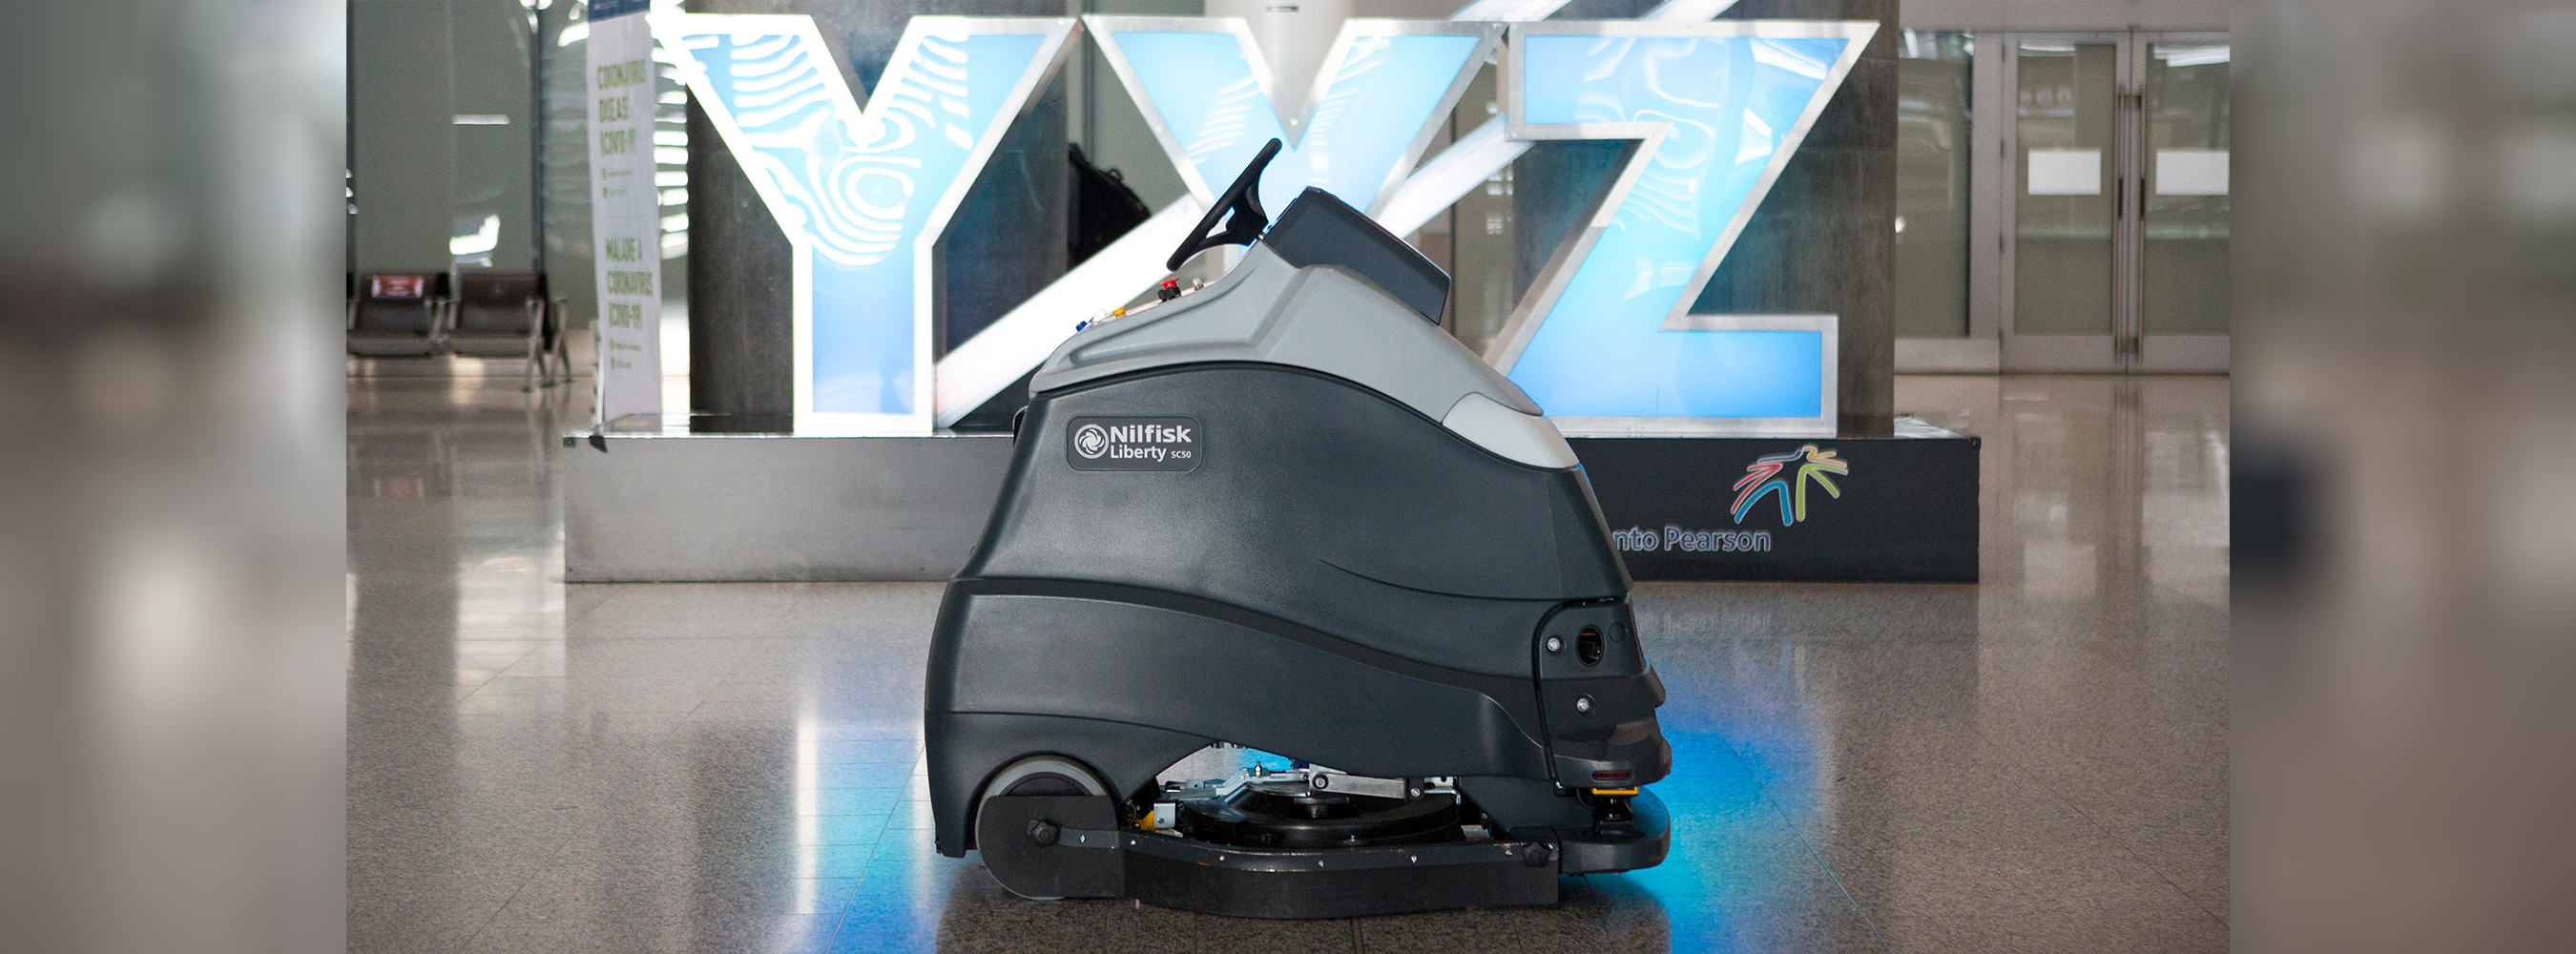 Hero image of a robotic cleaning machine